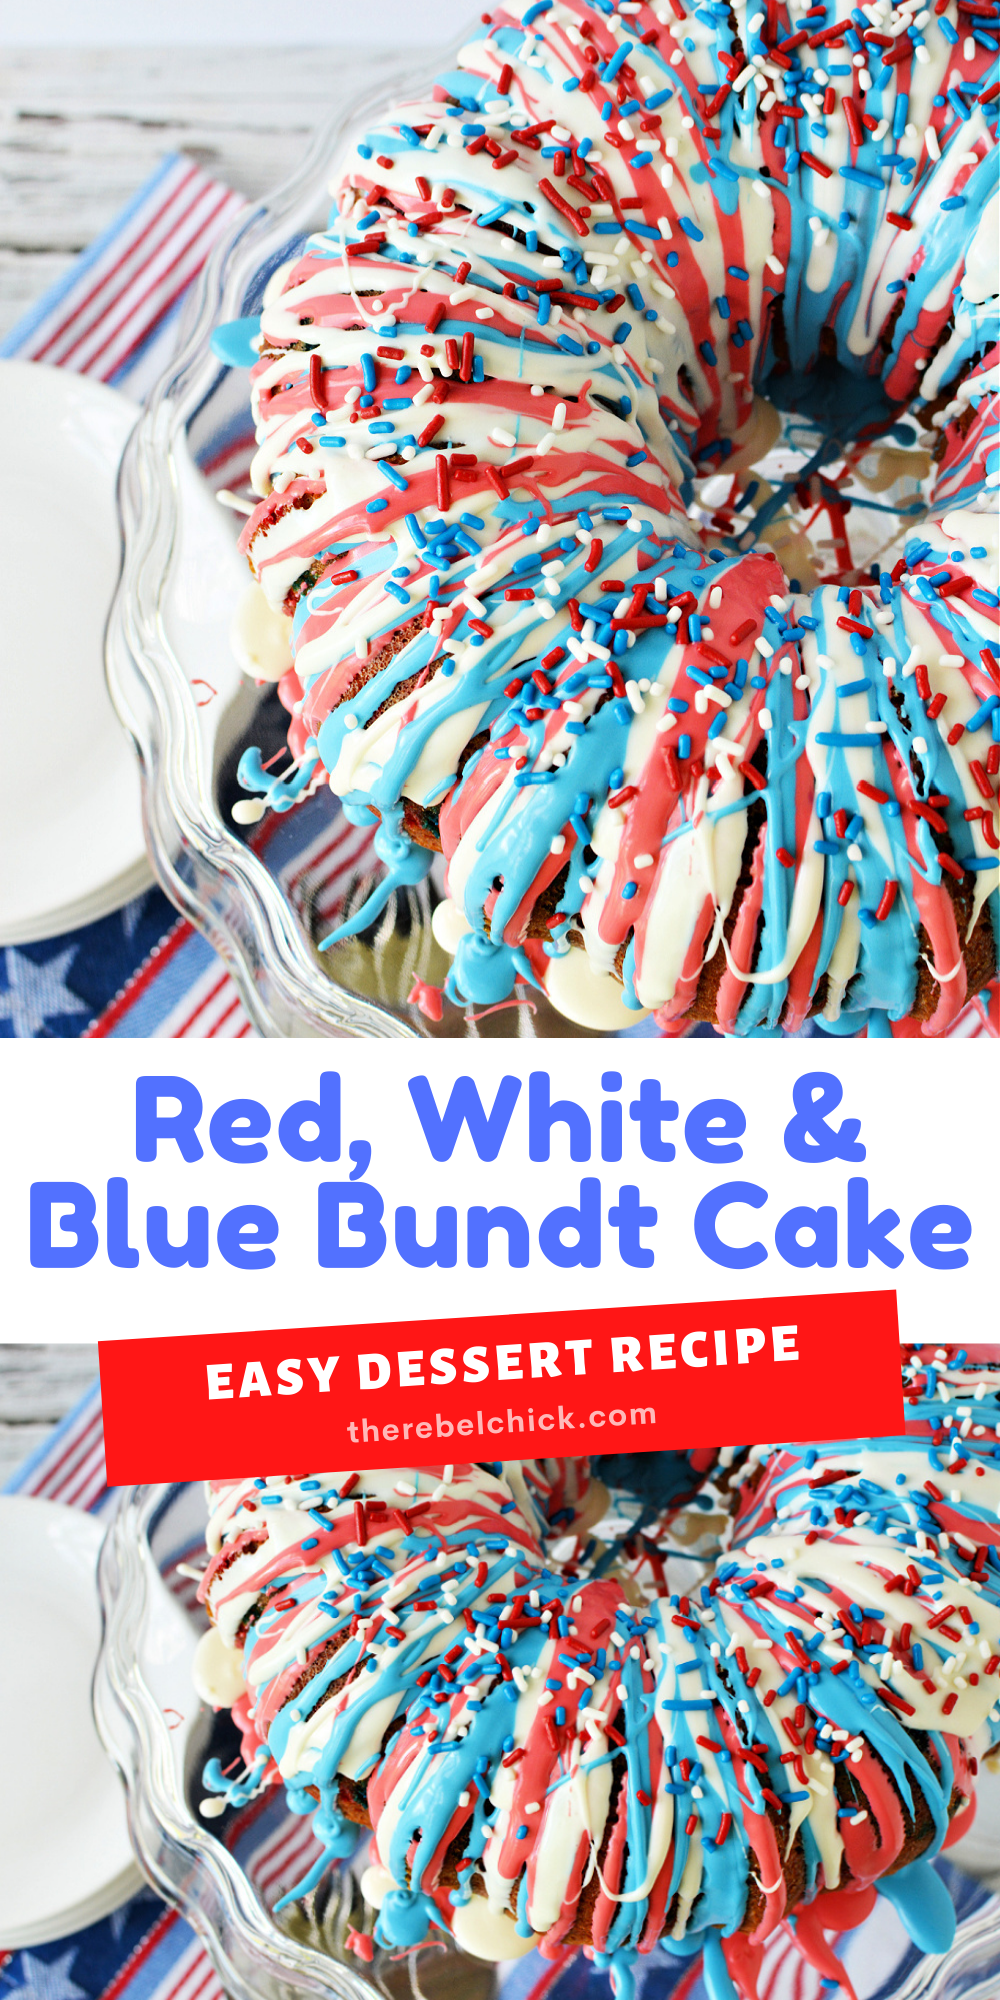 Red, White and Blue Bundt Cake